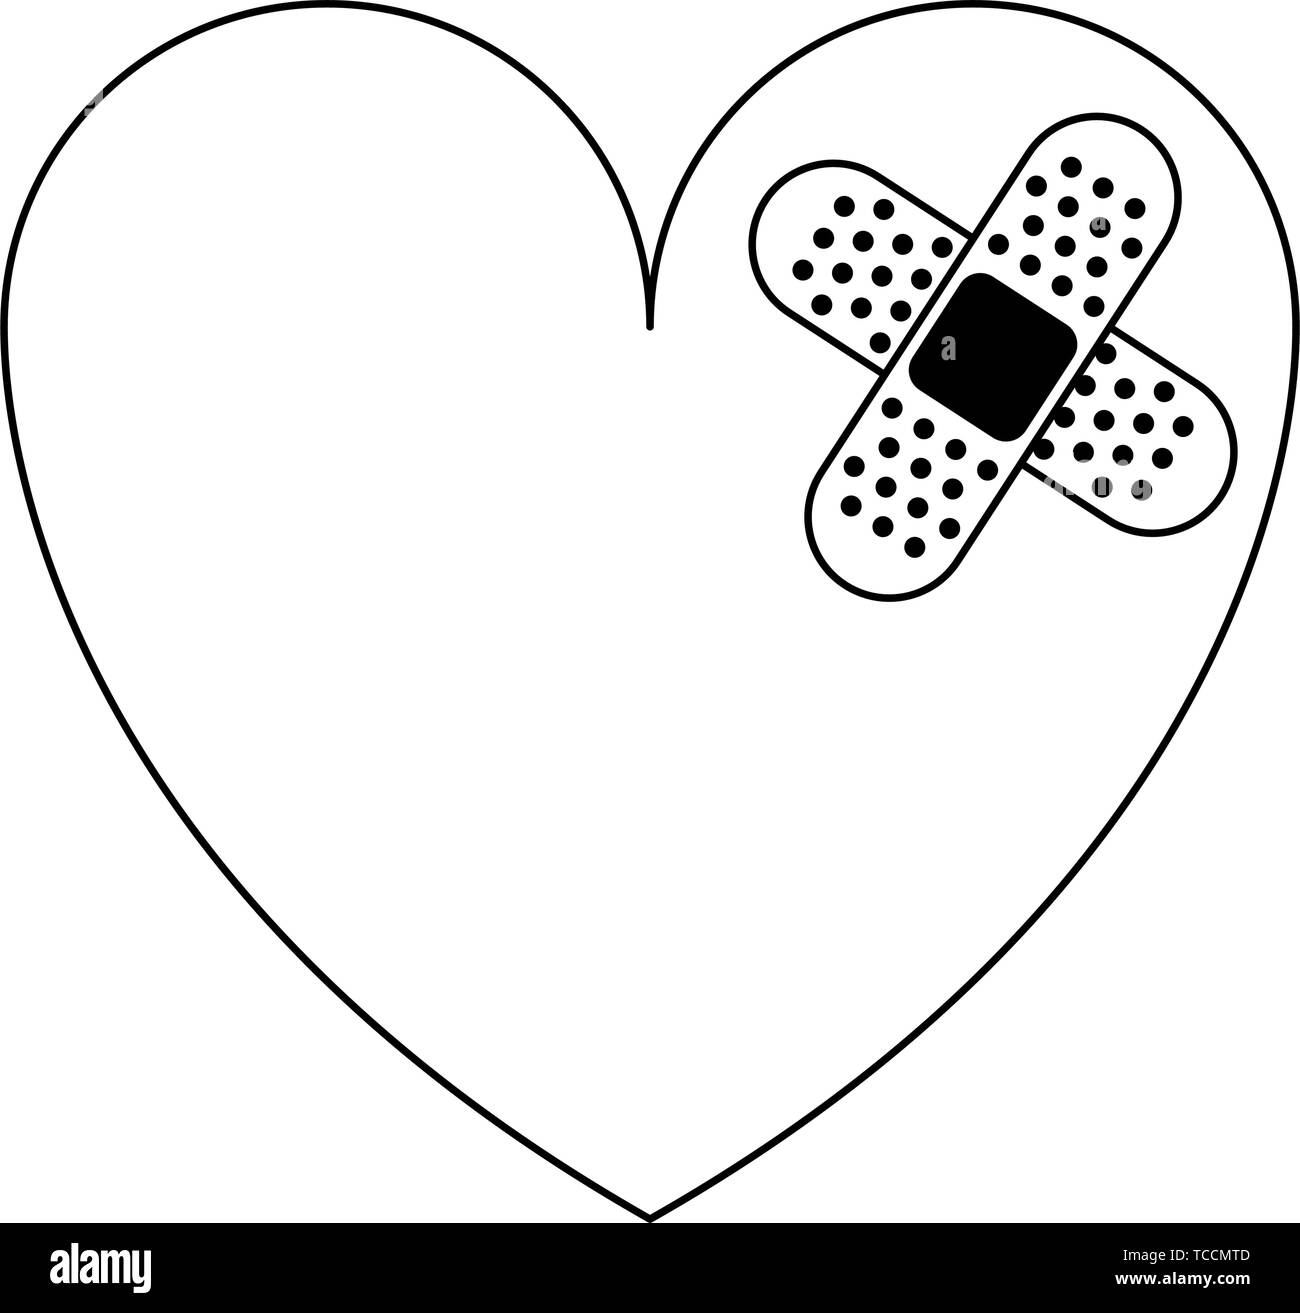 Heart with band aid medical symbol in black and white Stock Vector Image &  Art - Alamy